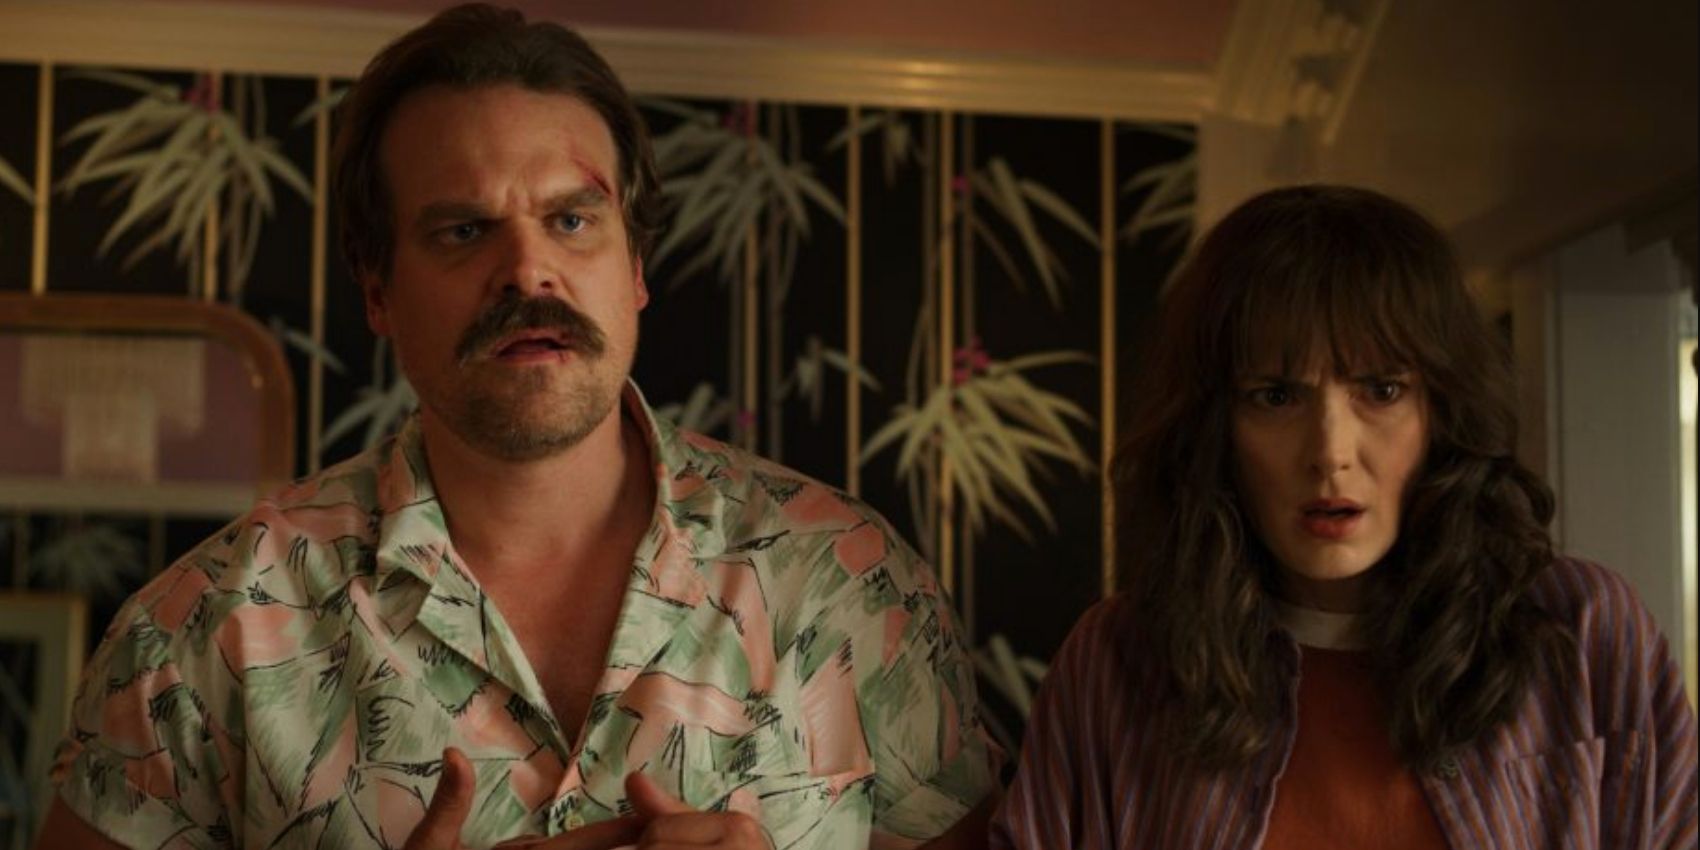 Joyce (Winona Ryder) and Hopper (David Harbour) looking surprised in Stranger Things